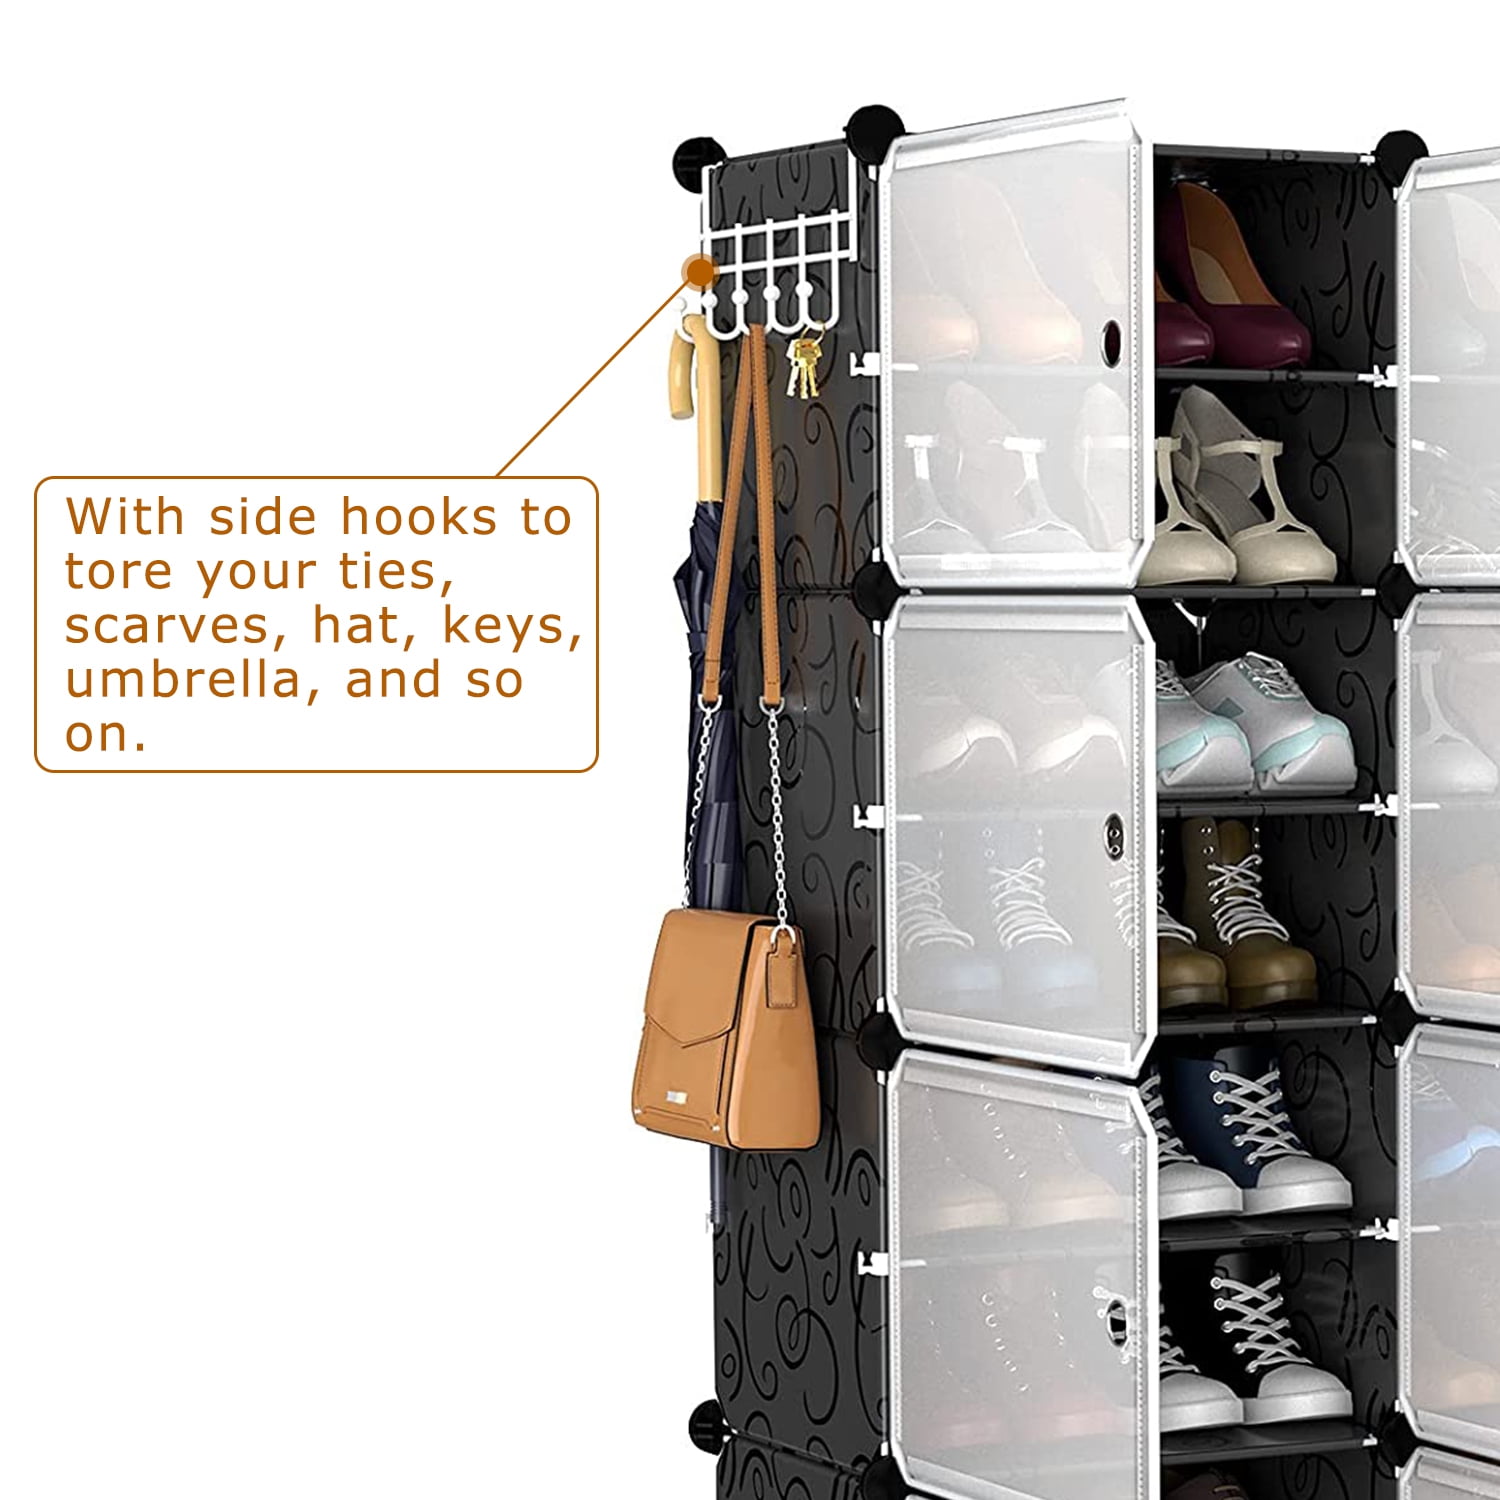 8-Tier 2-Row Shoe Rack Organizer Stackable Free Standing Shoe Storage Shelf  Plastic Shoe Cabinet Tower with Transparent Doors for Heels Boots Slippers